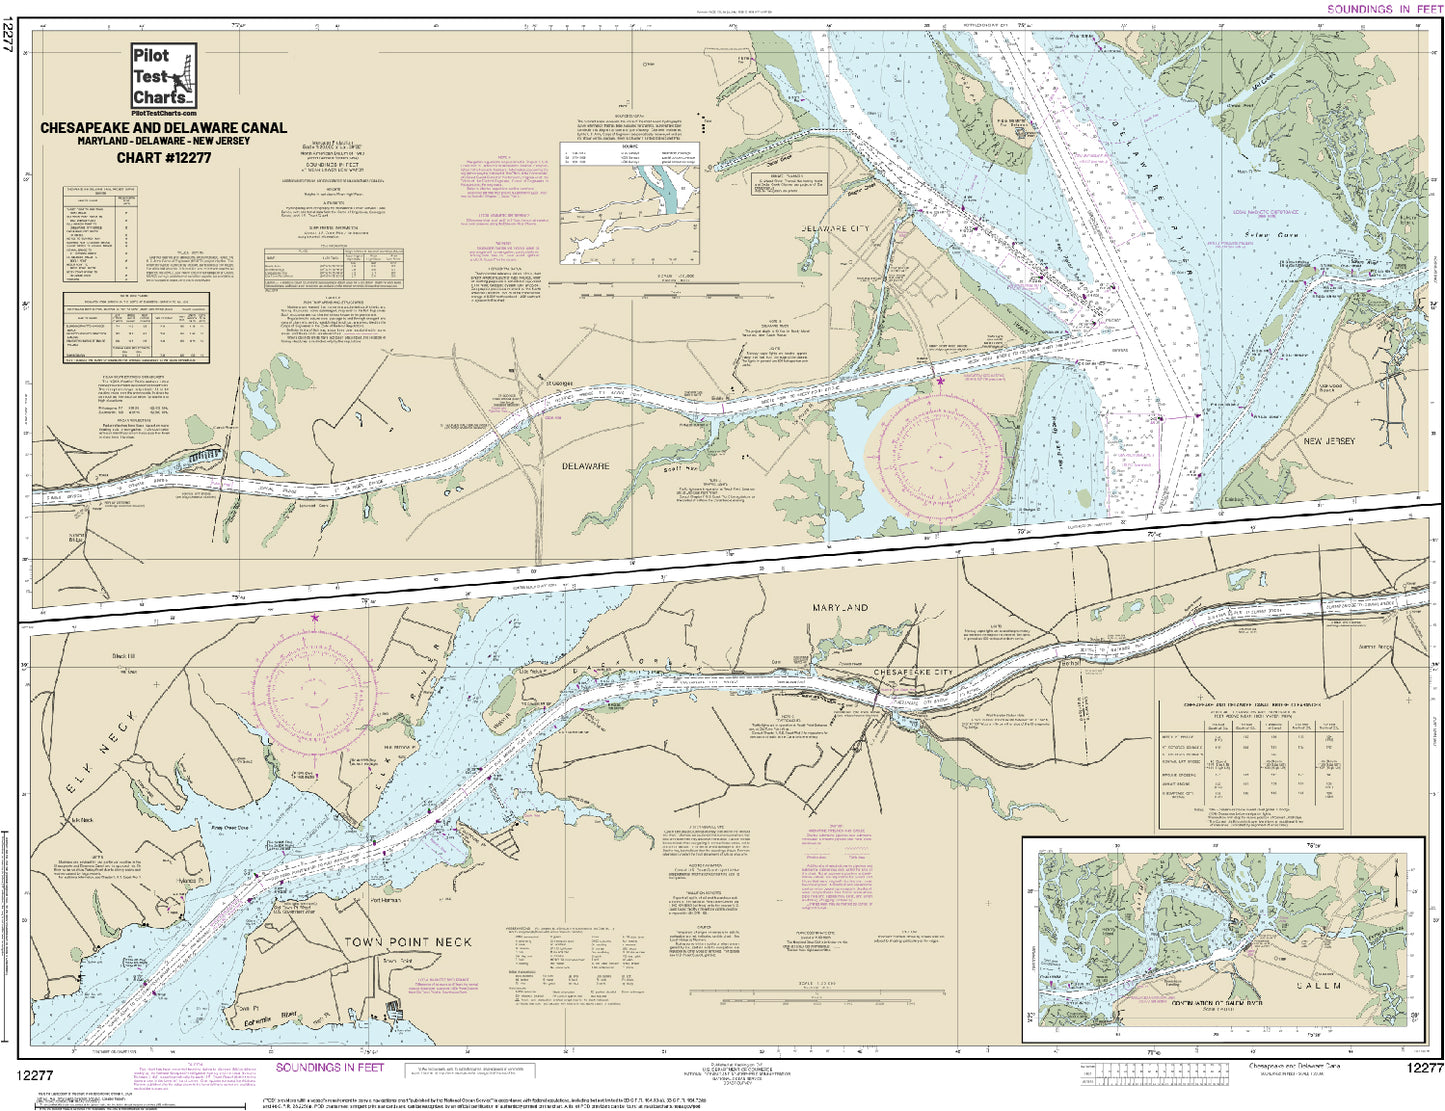 #12277 Chesapeake and Delaware Canals, Maryland-Delaware-New Jersey Chart